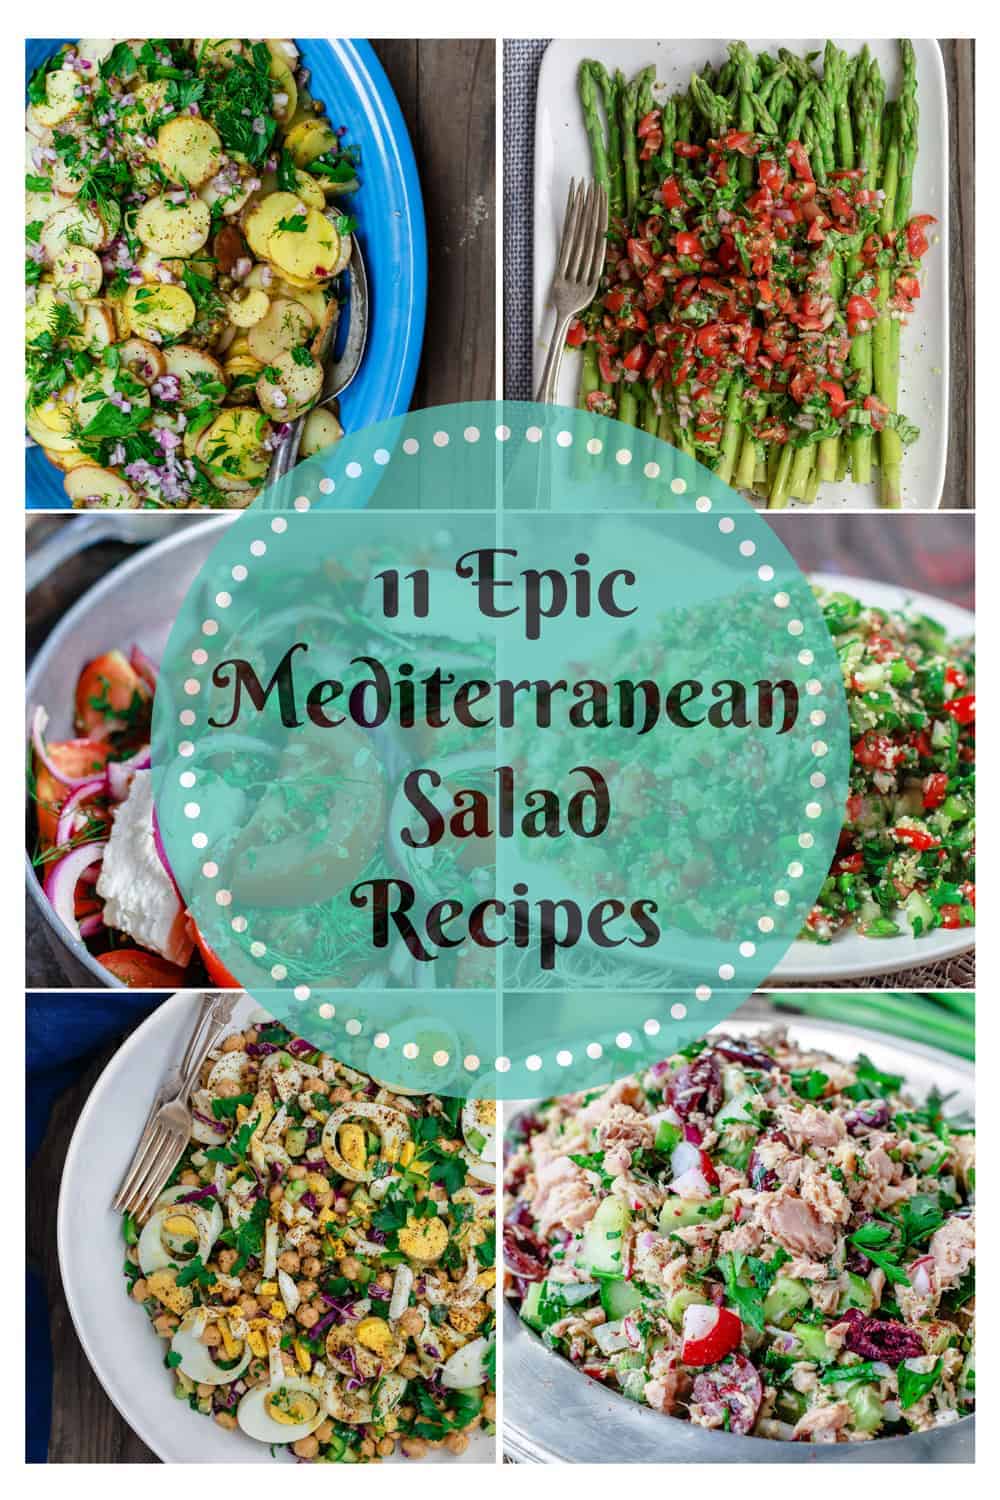 11 Epic Mediterranean Salad Recipes | The Mediterranean Dish. Easy salad recipes loaded with Mediterranean flavors and great ingredients. Perfect for any night of the week, summer picnics and more. Tabouli, fattoush, potato salad, chikpea salad, and more! from themediterraneandish.com #salad #chickpeasalad #tabouli #mediterraneansalad #greeksalad #balela #tunasalad #ptoatsalad 